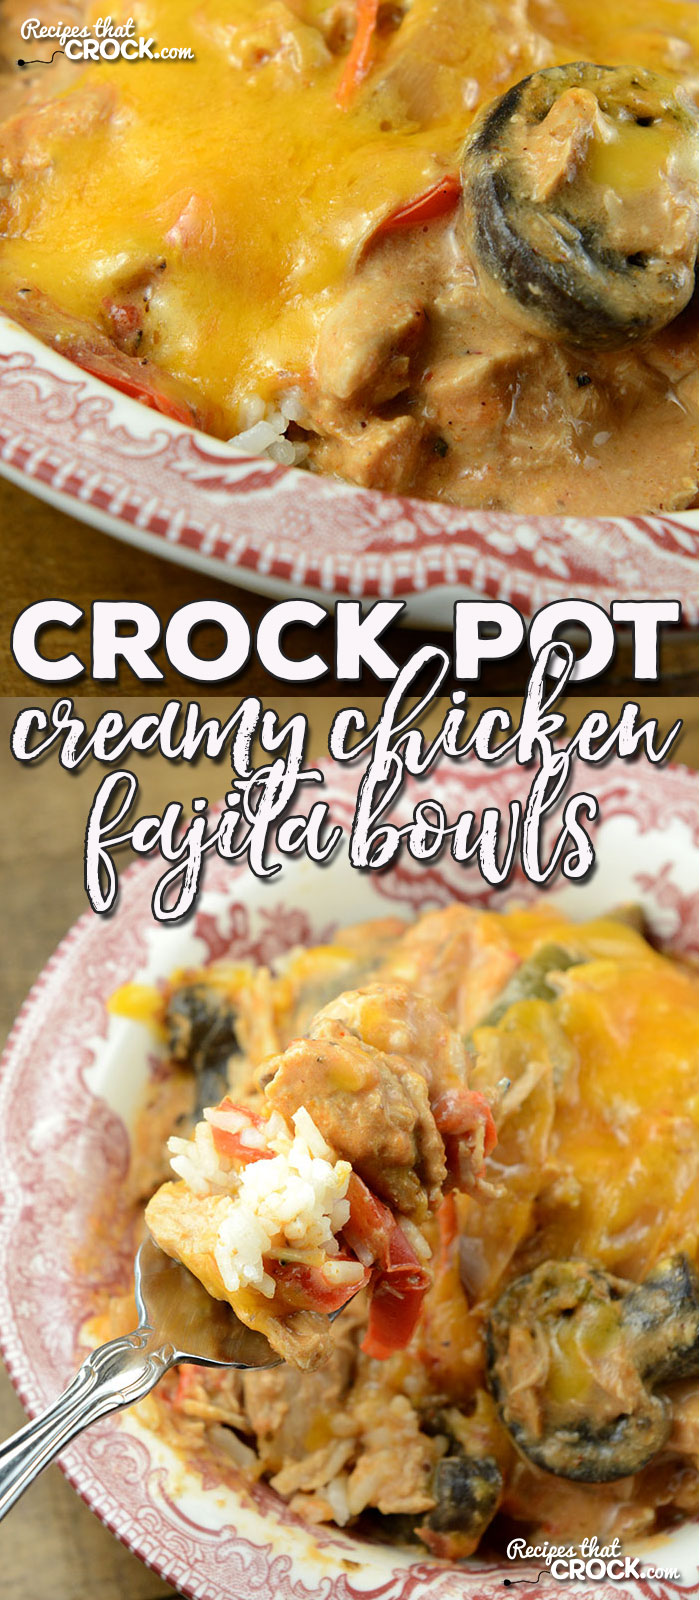 Do you love fajitas? Then you don't want to miss this recipe for Crock Pot Creamy Chicken Fajita Bowls! They are absolutely delicious!